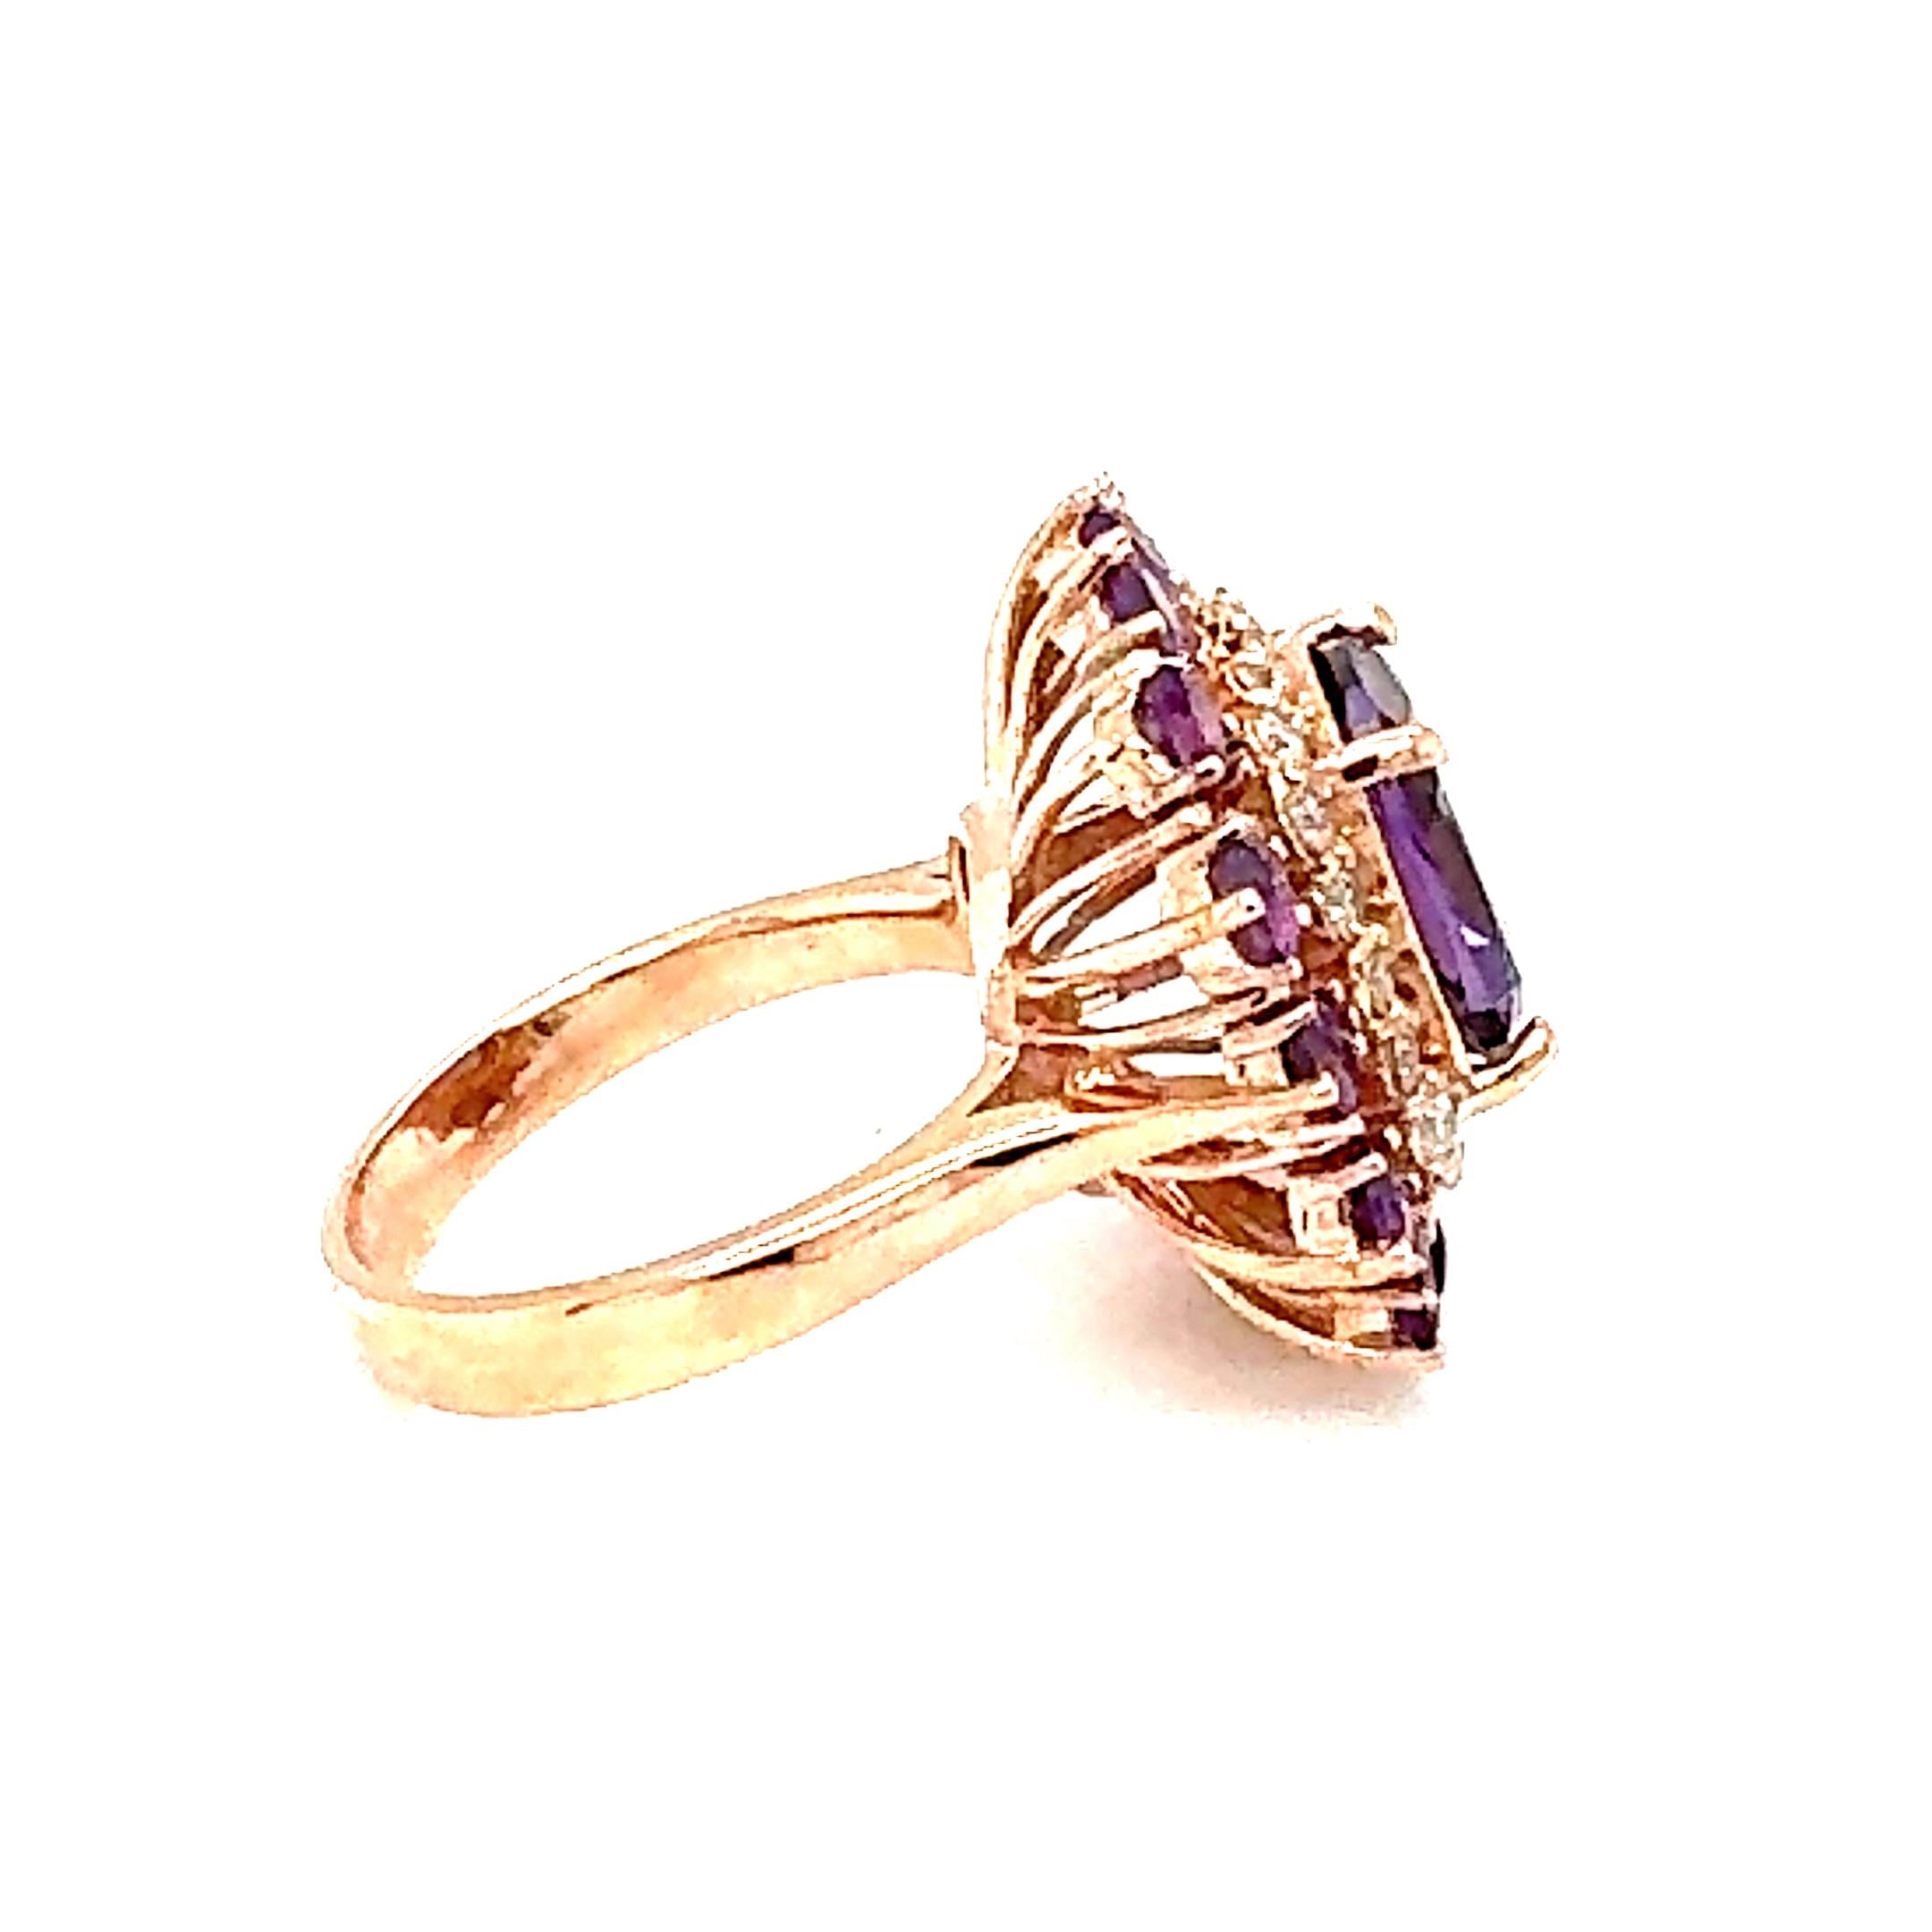 5.67 Carat Cushion Cut Amethyst Pink Sapphire Diamond Rose Gold Cocktail Ring In New Condition For Sale In Los Angeles, CA